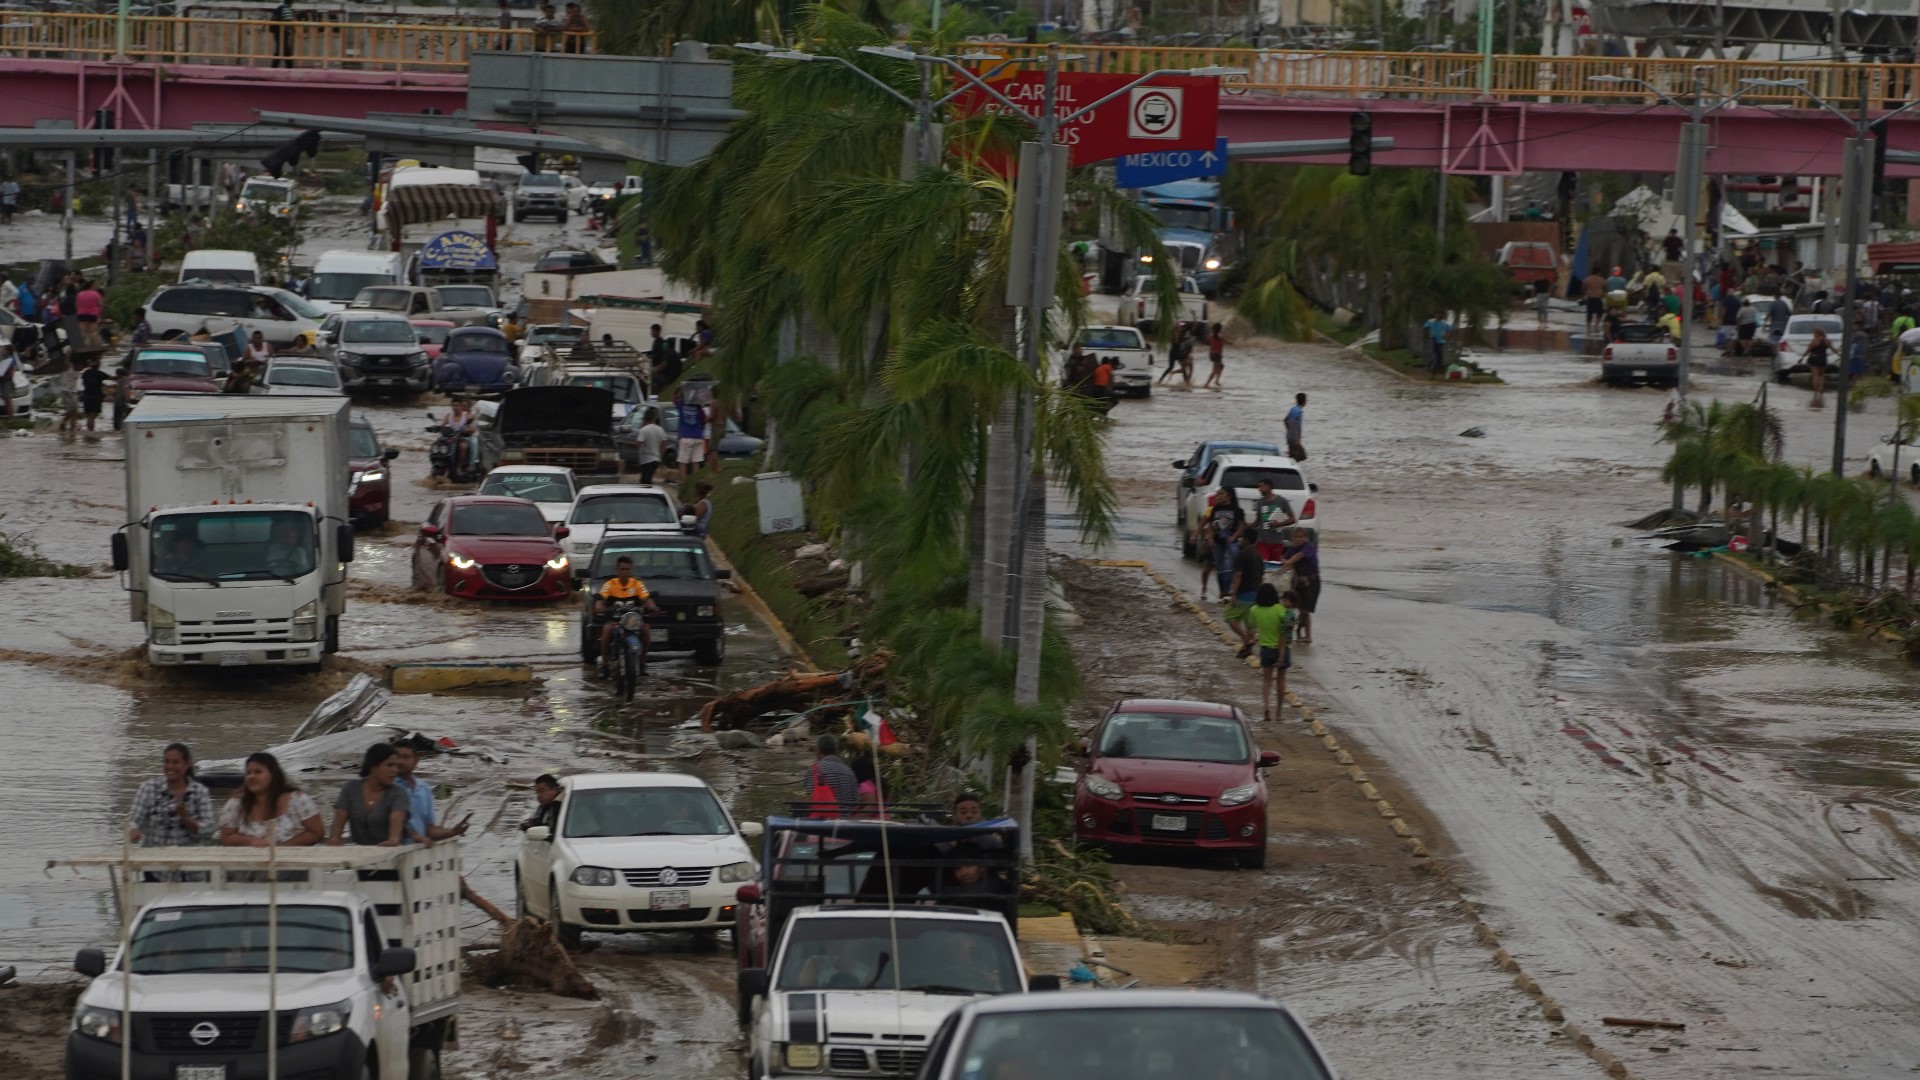 The early images and accounts were of extensive devastation in Acapulco, toppled trees and power lines lying in floodwaters.